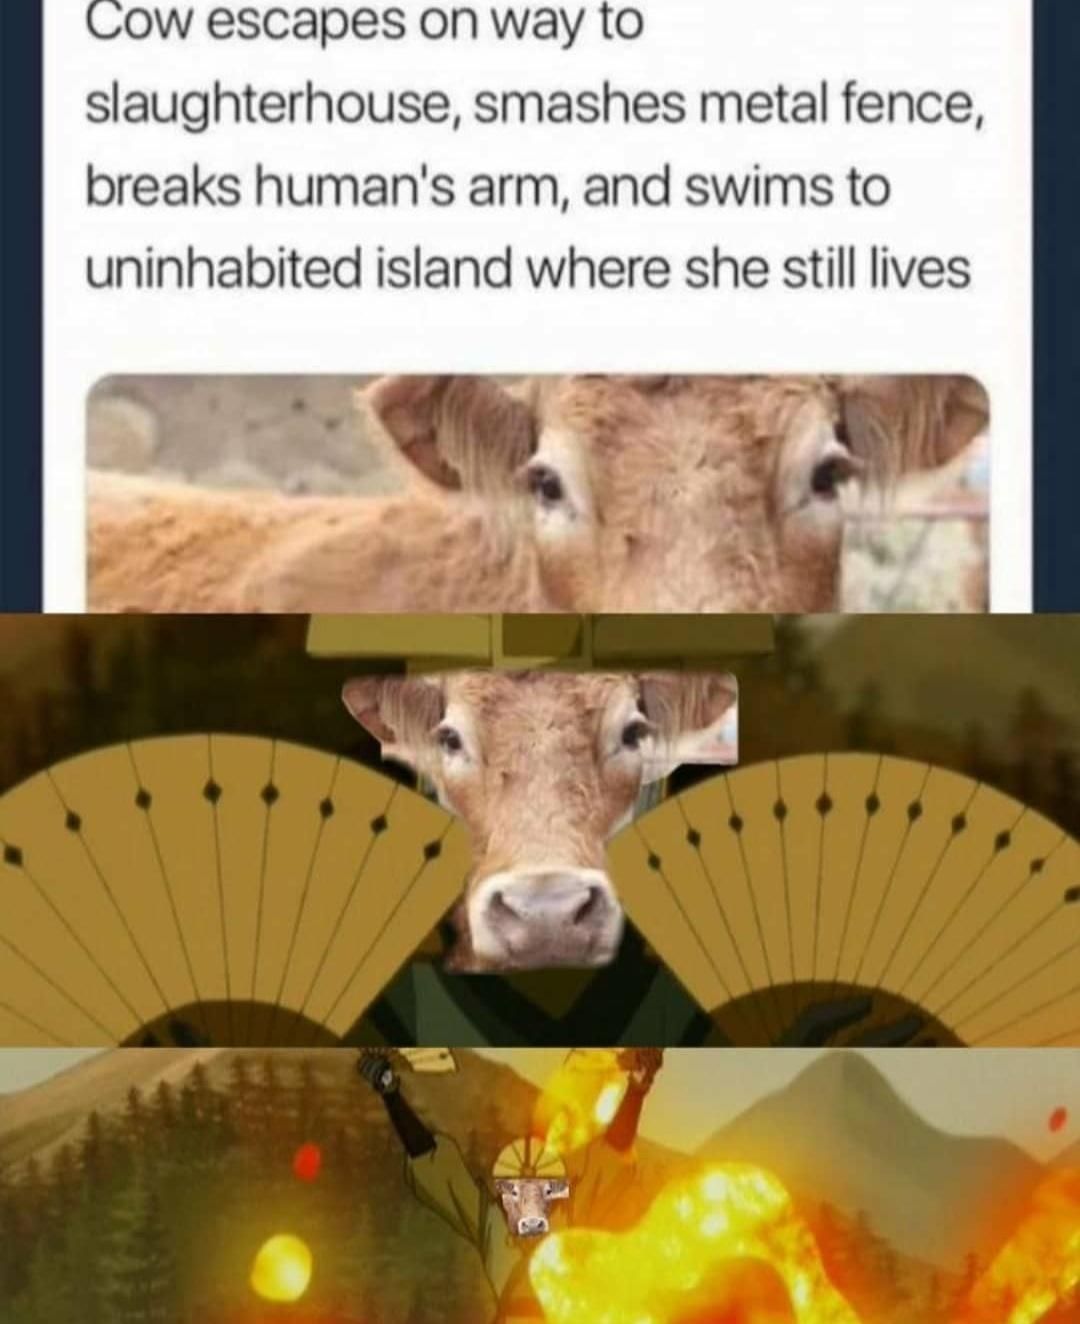 This cow deserves everything.